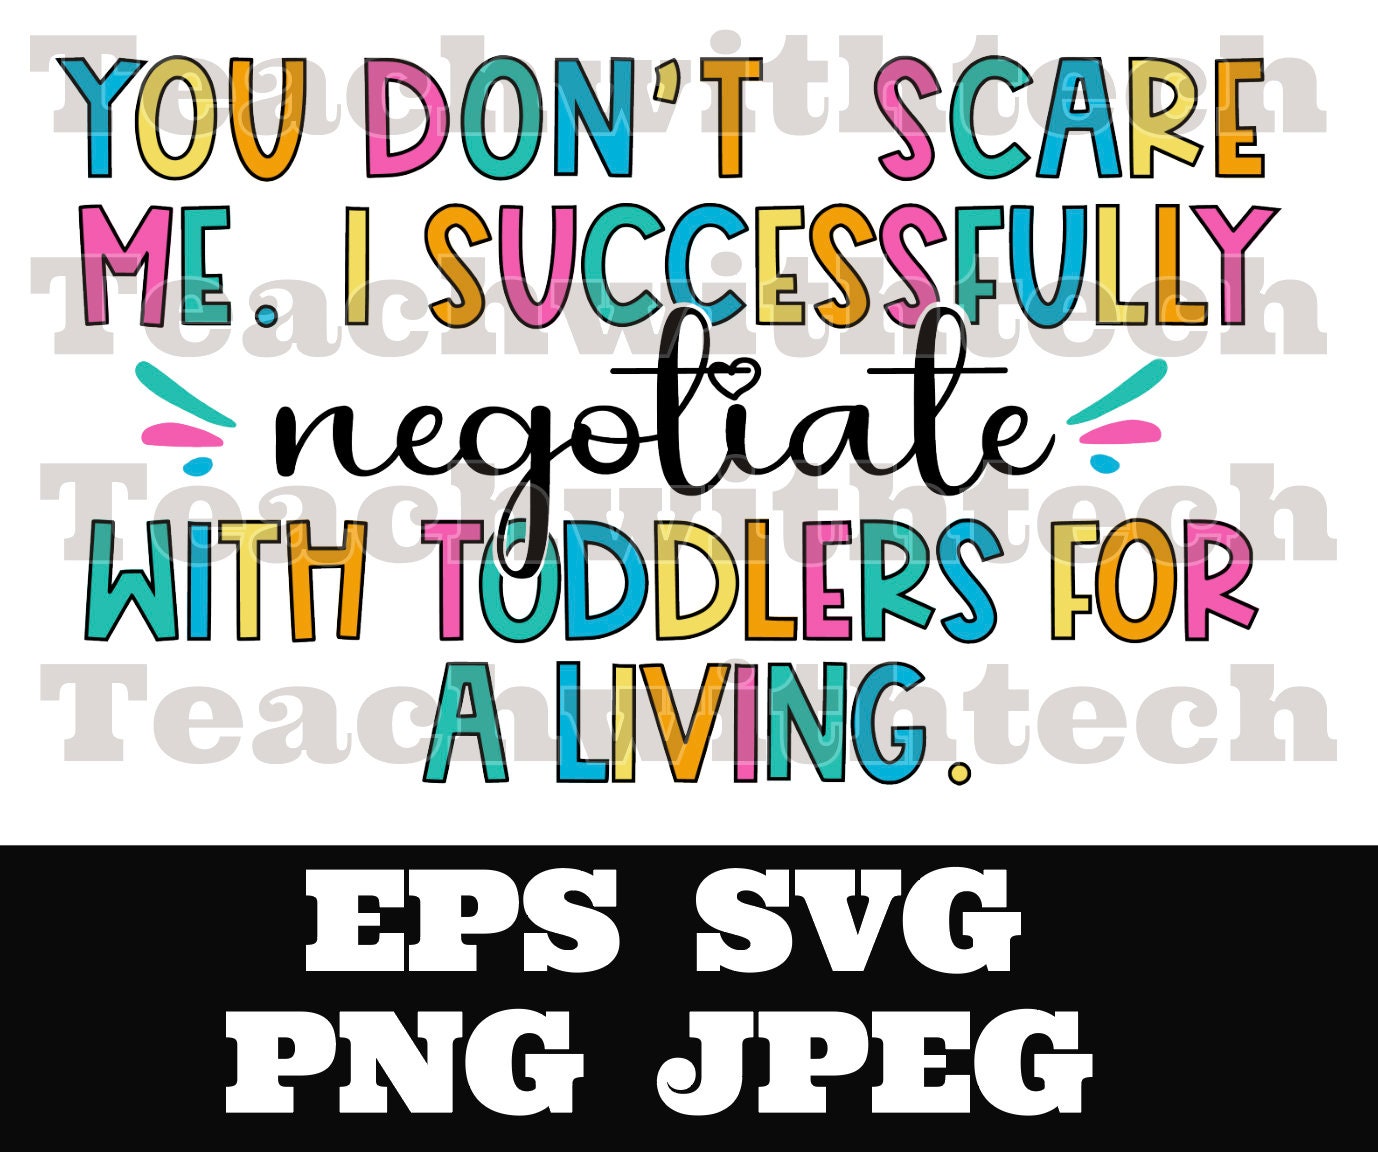 You don’t scare me. I successfully negotiate with toddlers for a living.  SVG PNG eps jpeg Nanny Teacher Educator Cricut Silhouette Cut File